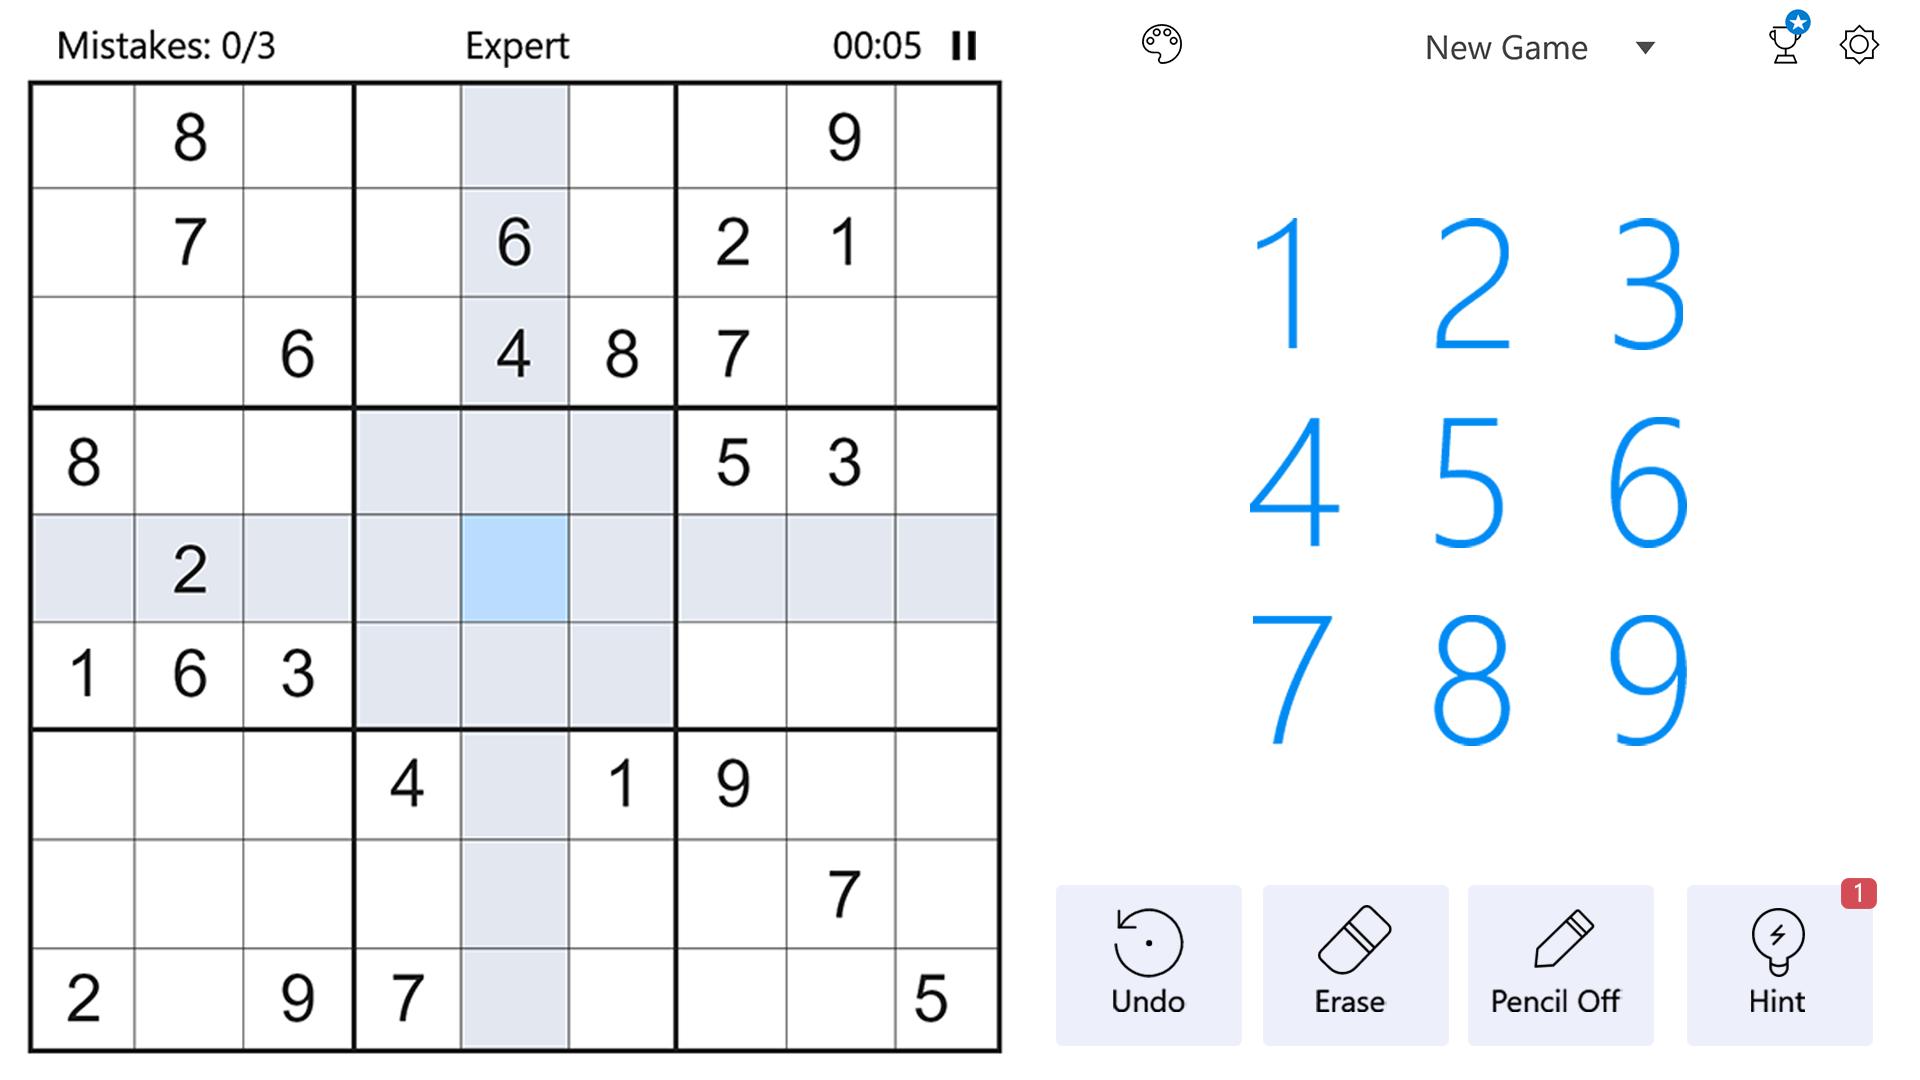 Sudoku for Android - APK Download